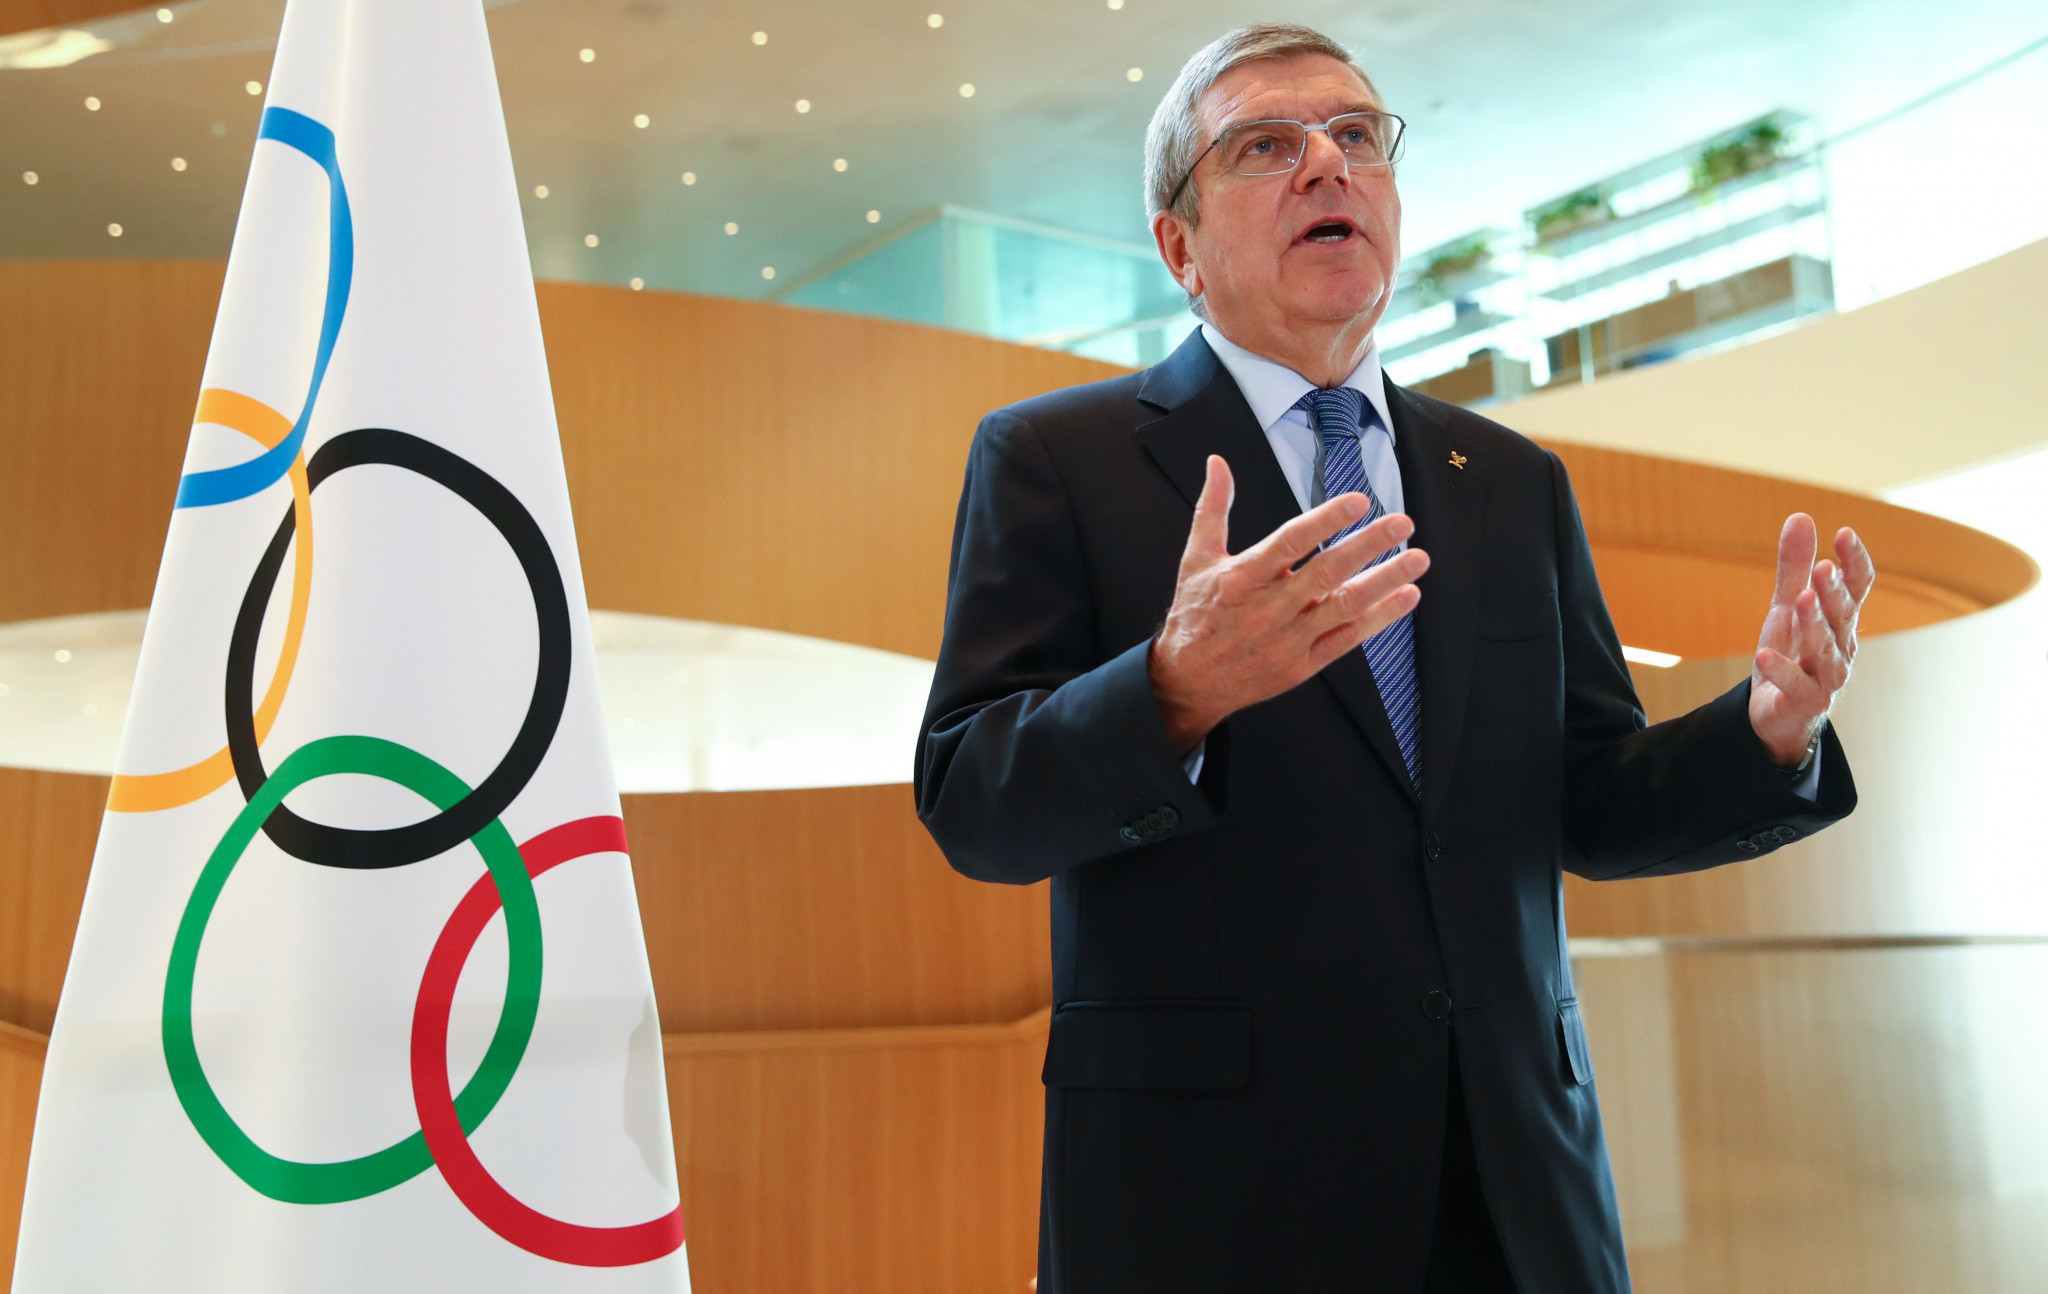 Bach says Tokyo 2020 can be comeback festival of sport as one-year countdown marked